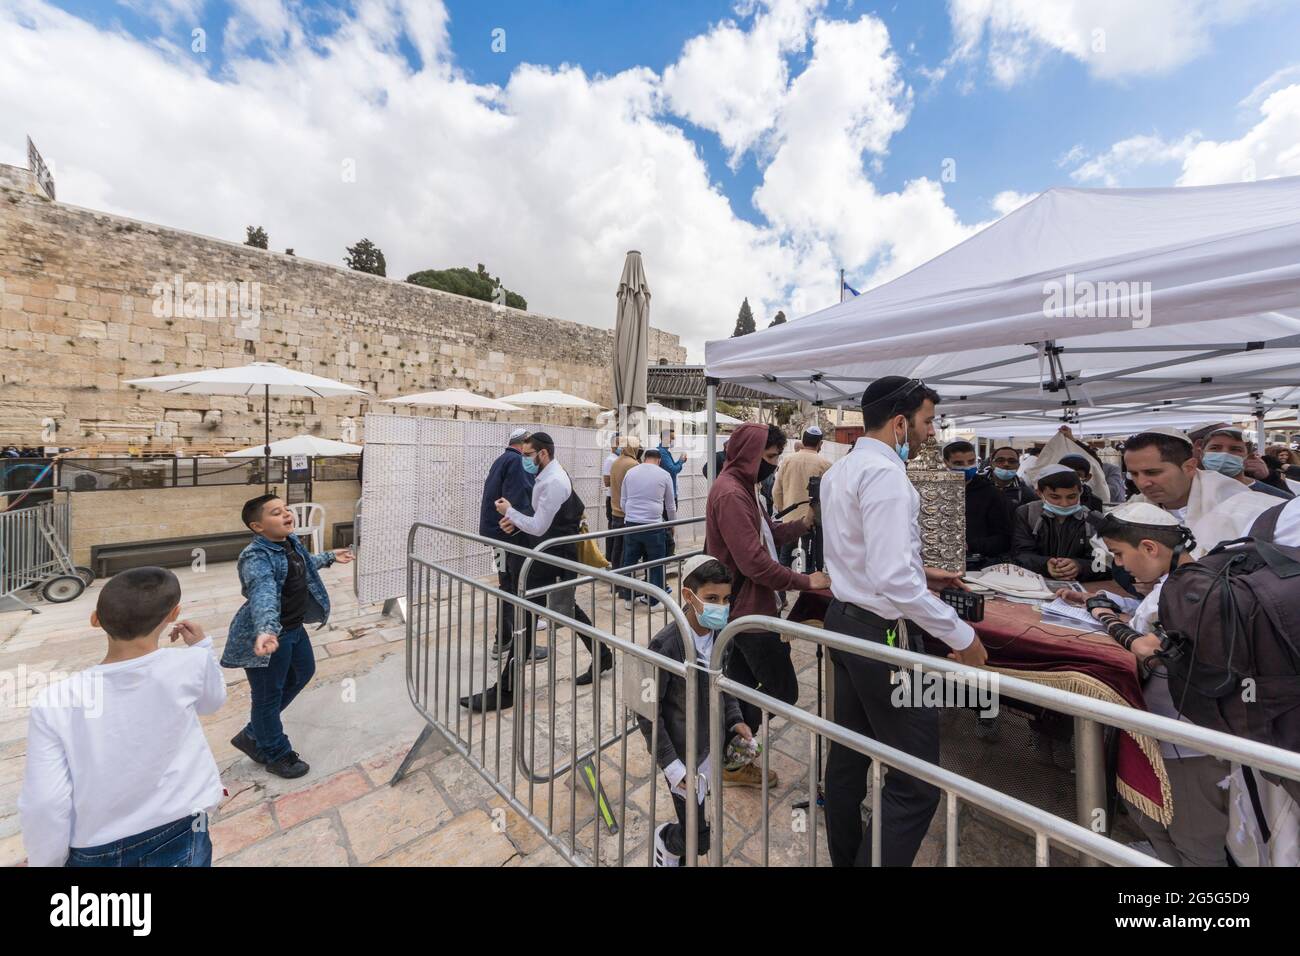 Jerusalem, Israel. A bar Mitzvah ceremony at the Western Wall, one of the holliest places for Judaism, during the COVID pandemic. The area was equipped with barriers and dividers to seperate people praying and keep a measure of social distancing. Stock Photo